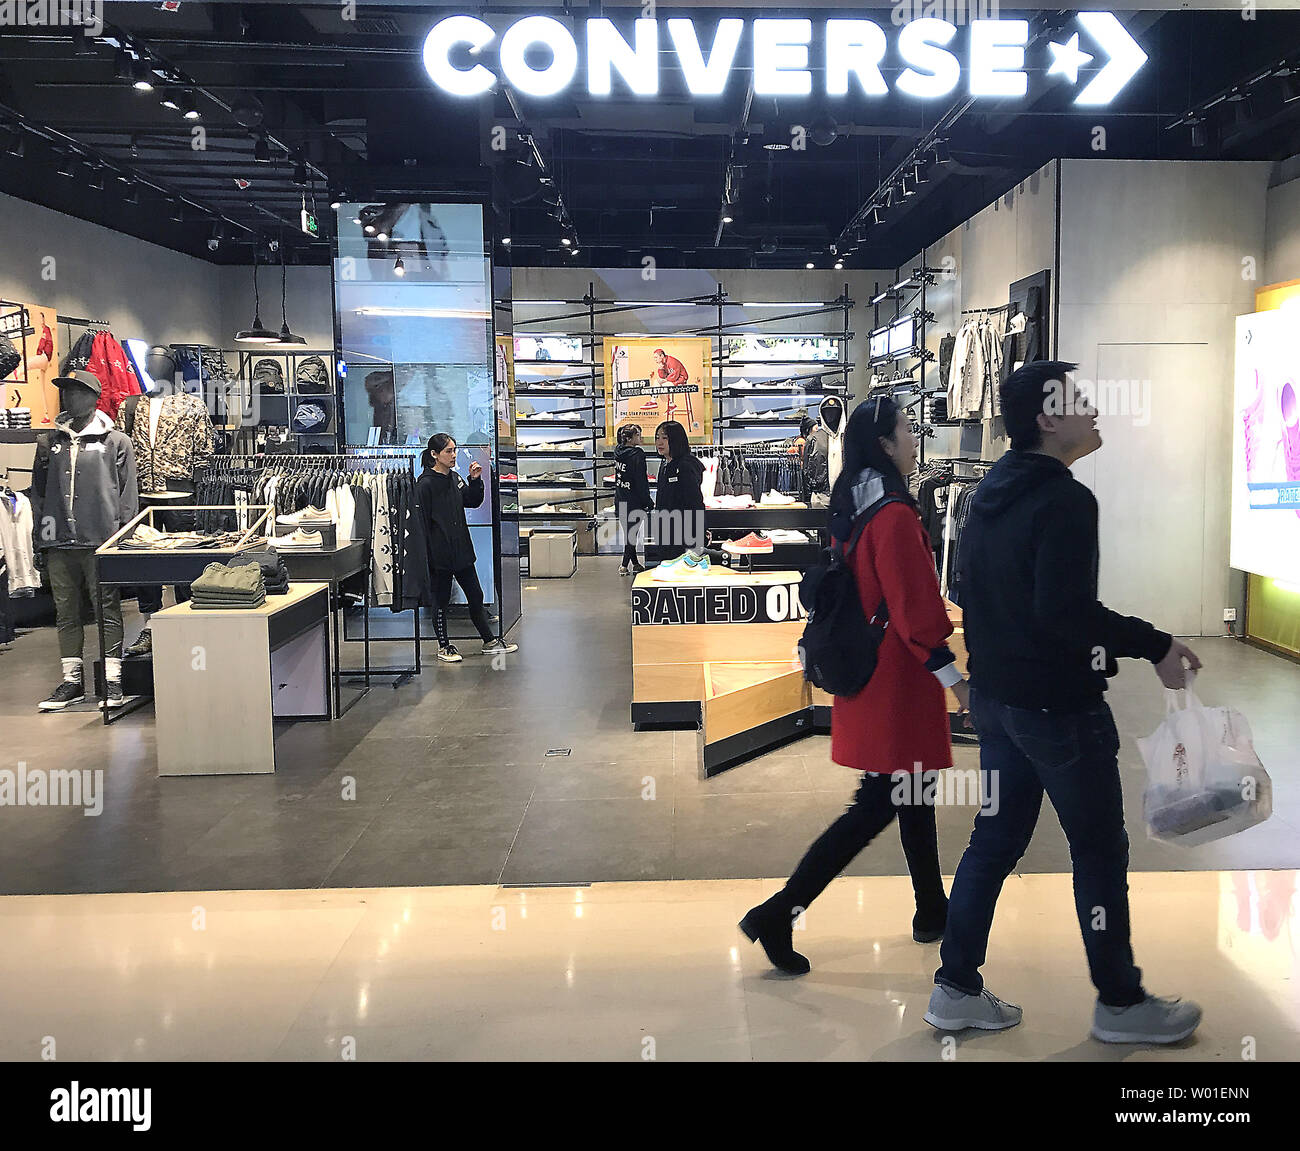 U.S.-based Converse clothing giant recently opened a store in Beijing on  April 3, 2018. China says ti will respond to any new trade tariffs by the  U.S. with measures of the same